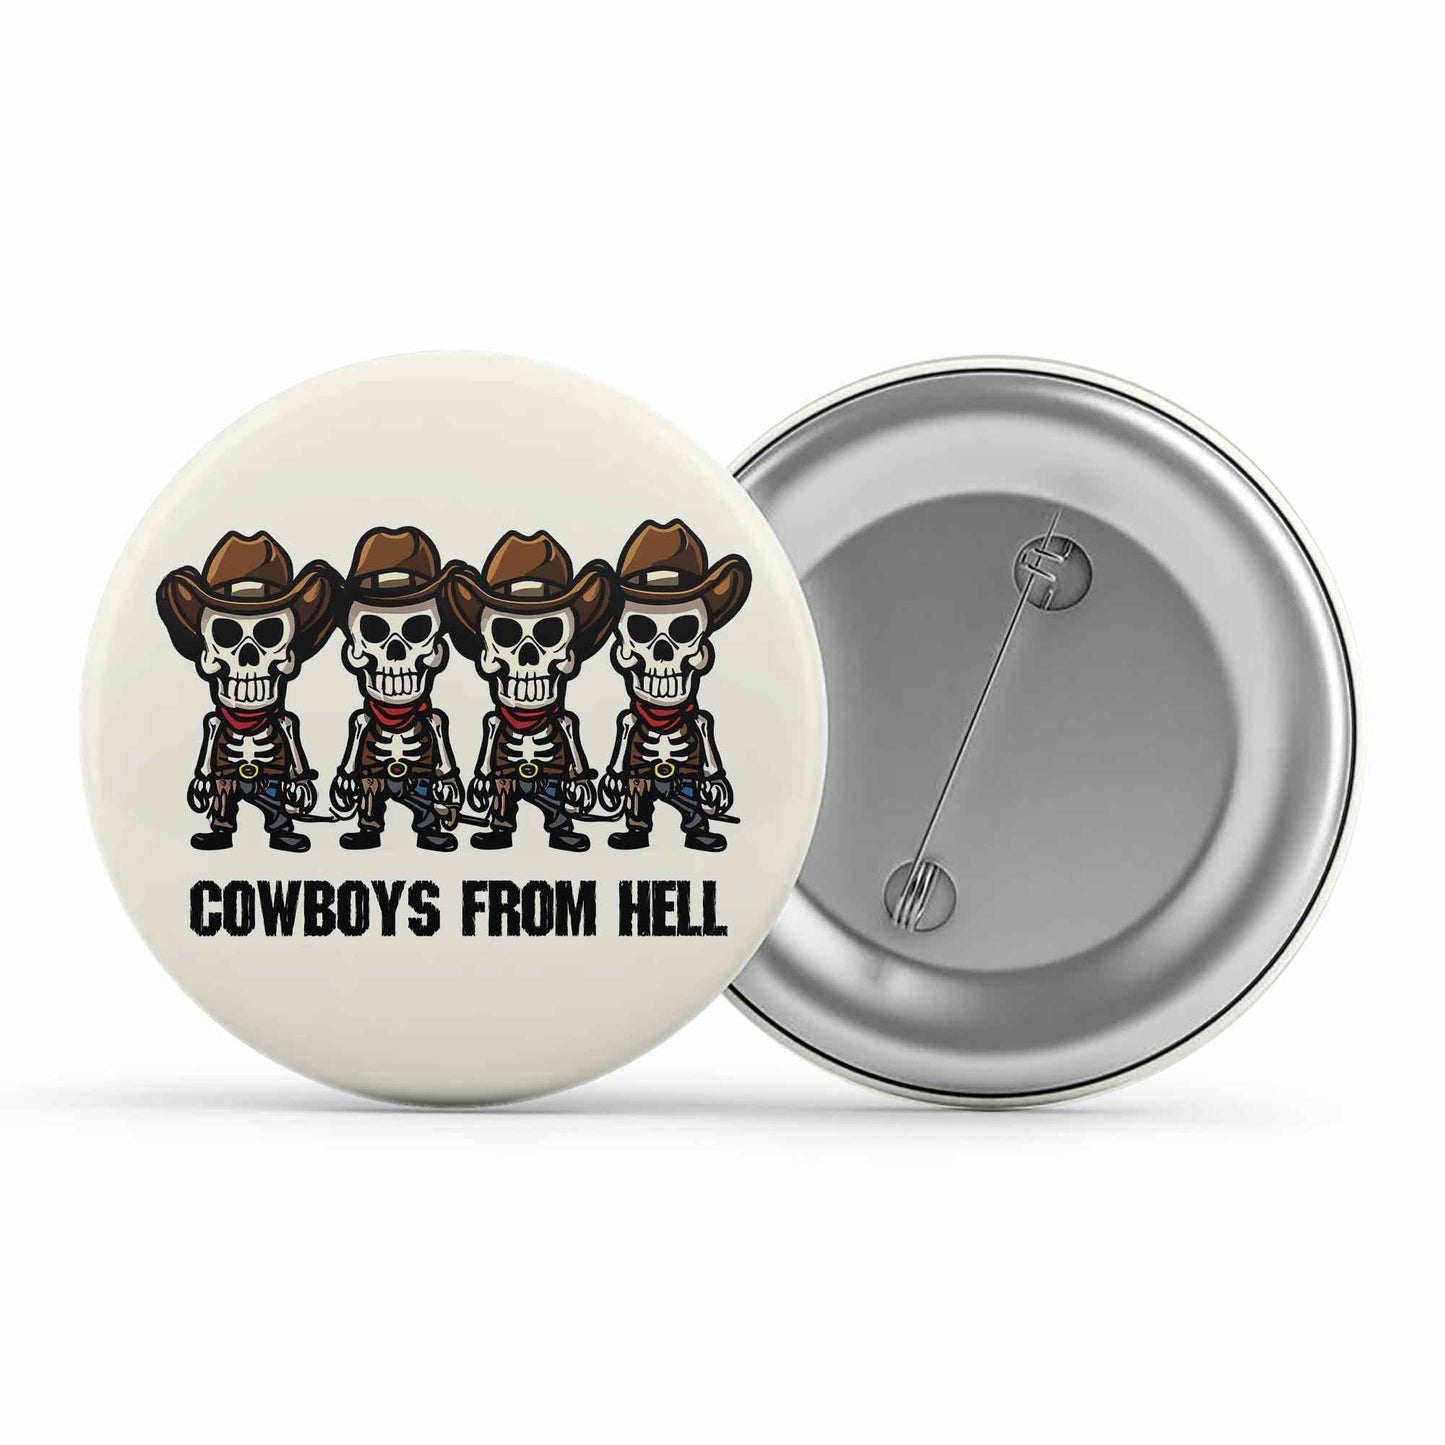 pantera cowboys from hell toon badge pin button music band buy online united states of america usa the banyan tee tbt men women girls boys unisex